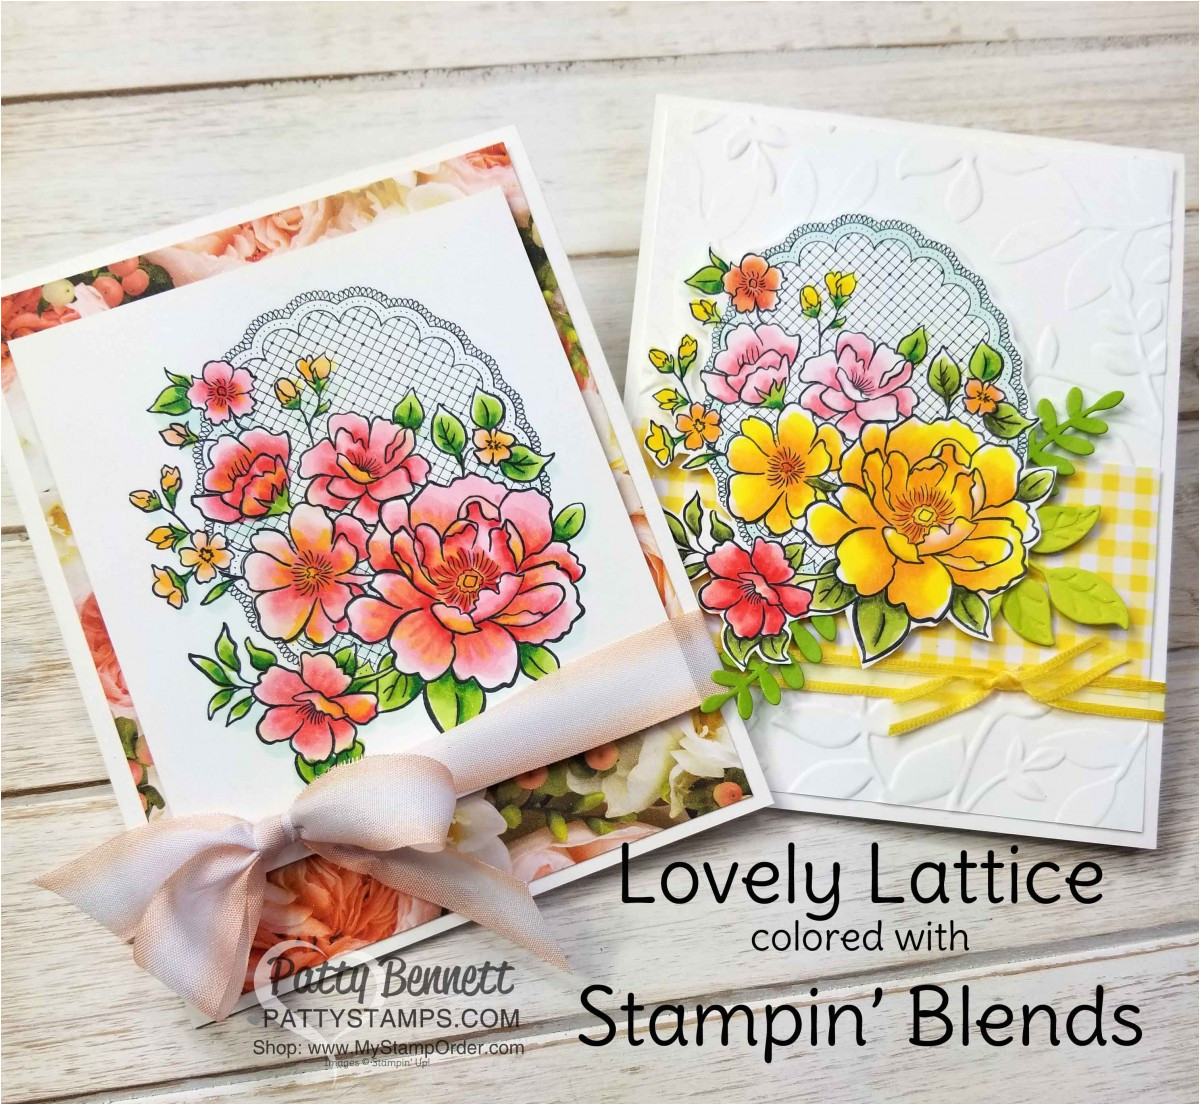 lovely lattice stampin up sale a bration free stamp blends coloring pattystamps cards jpg